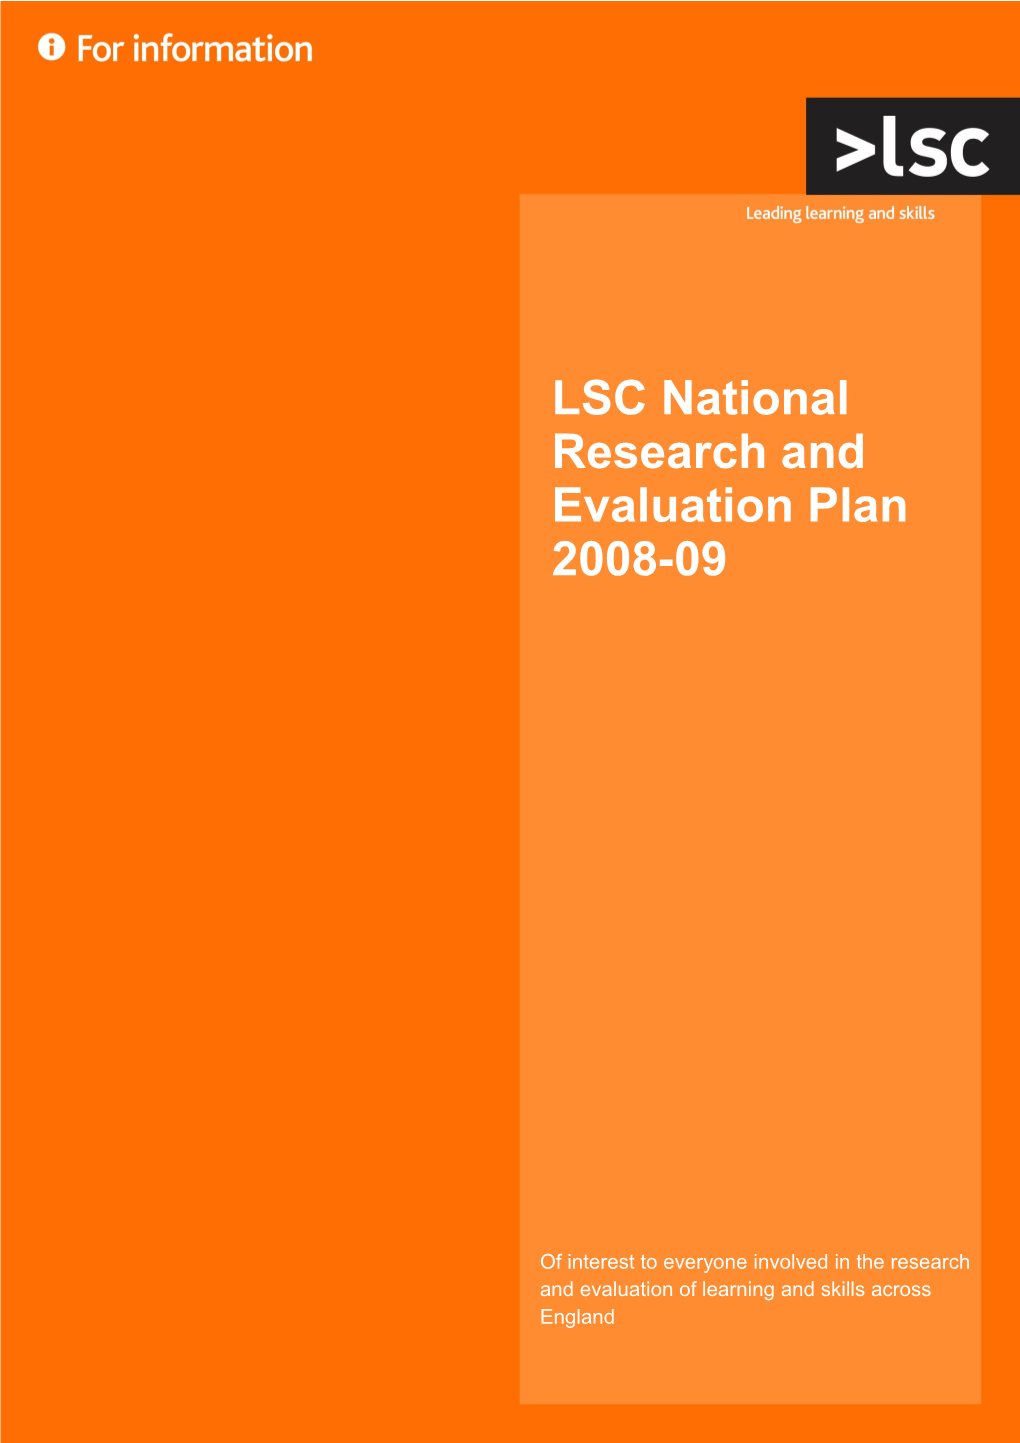 LSC National Research and Evaluation Plan 2008-09